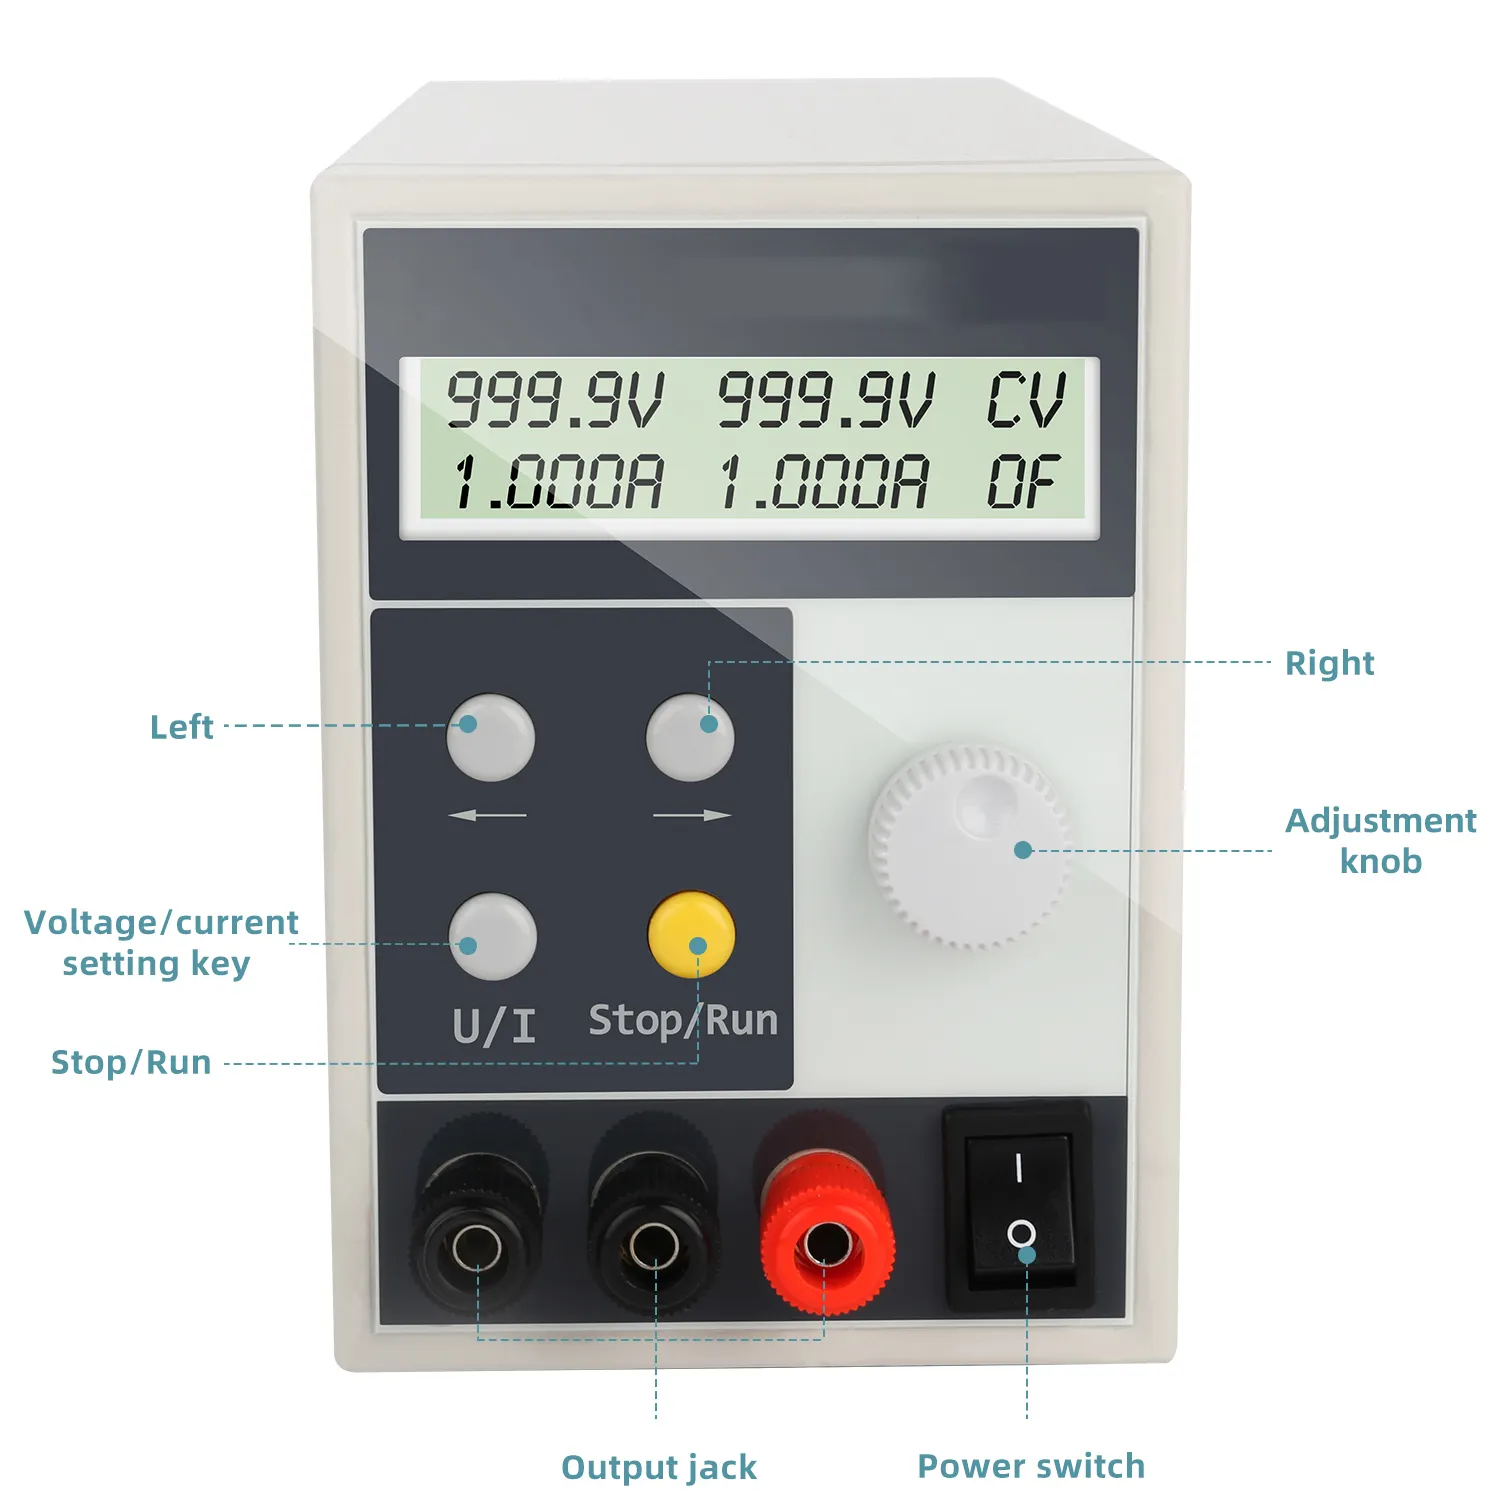 HSPY-1500-0.2 1500V 0.2A High Voltage Programmable DC Regulated Power Supply Digital Display Variable Lab Test Power Source